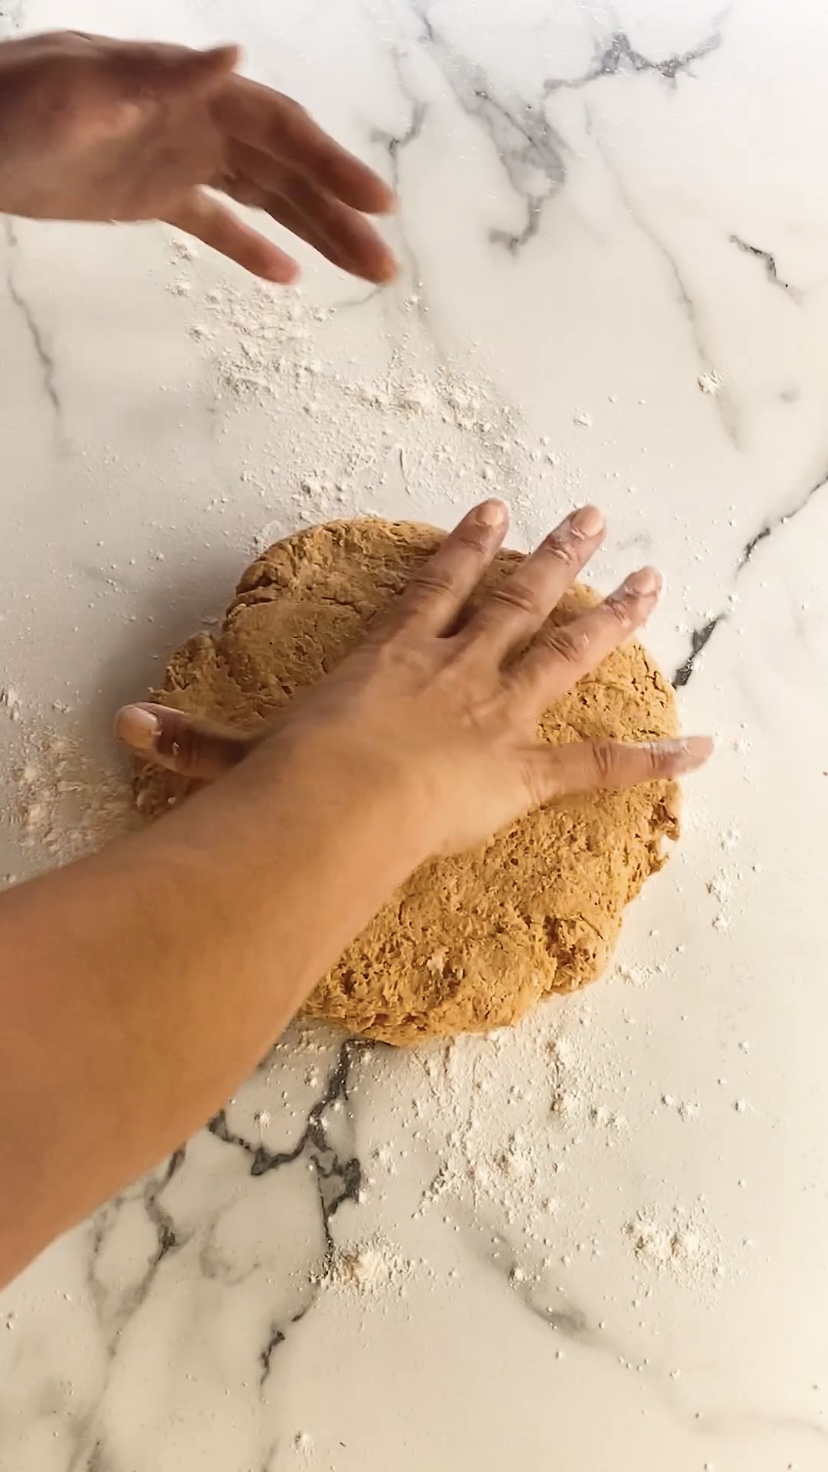 Measuring scone dough by the width of a hand.